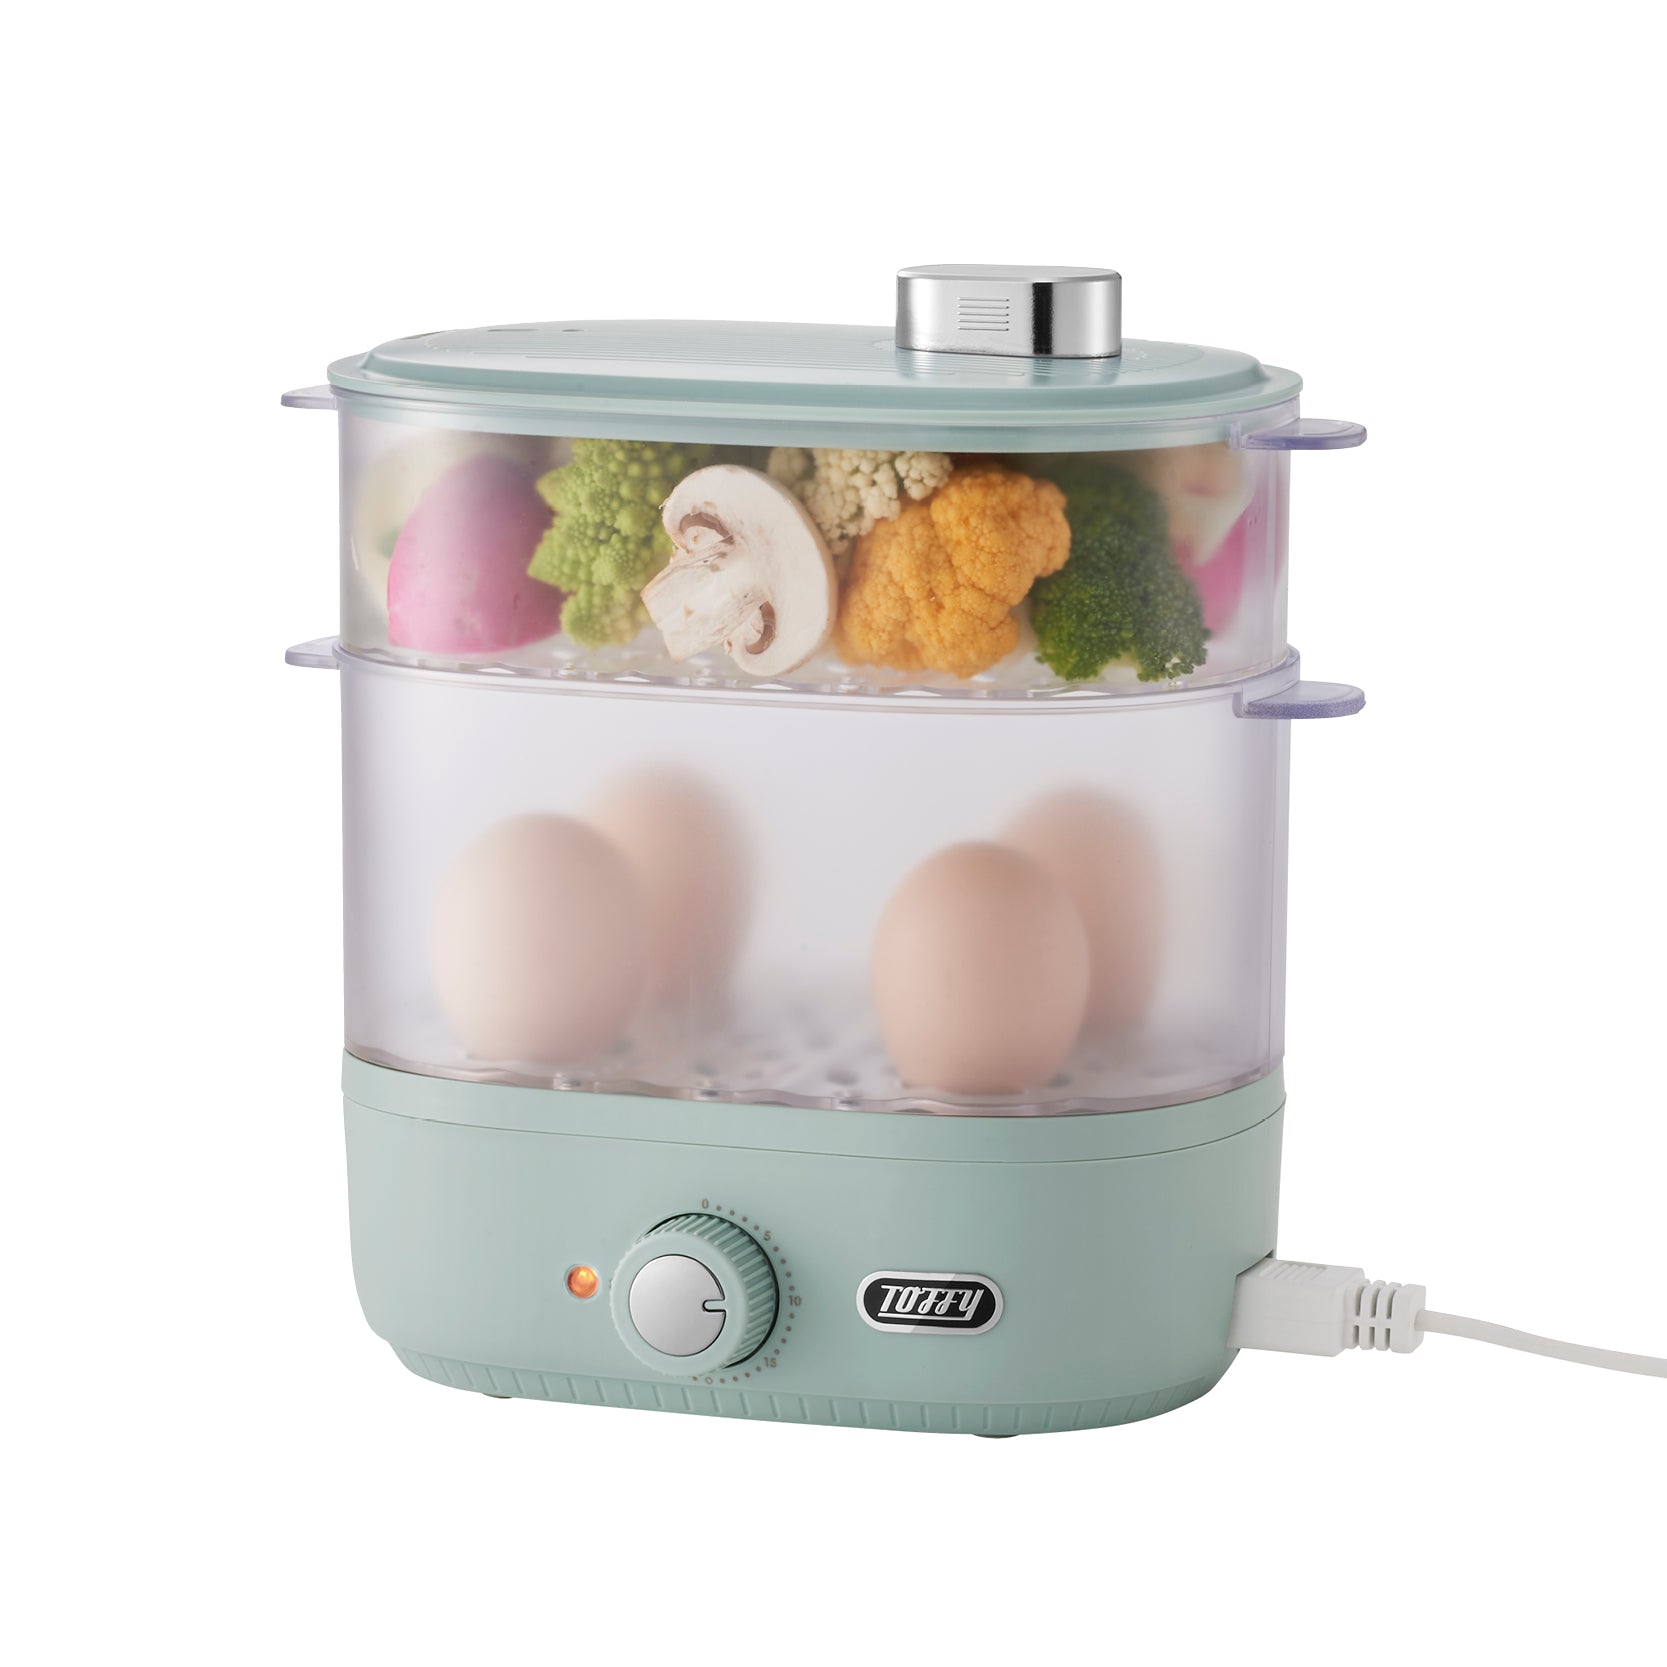 Toffy Compact Food Steamer 電蒸鍋 K-FS1-PA